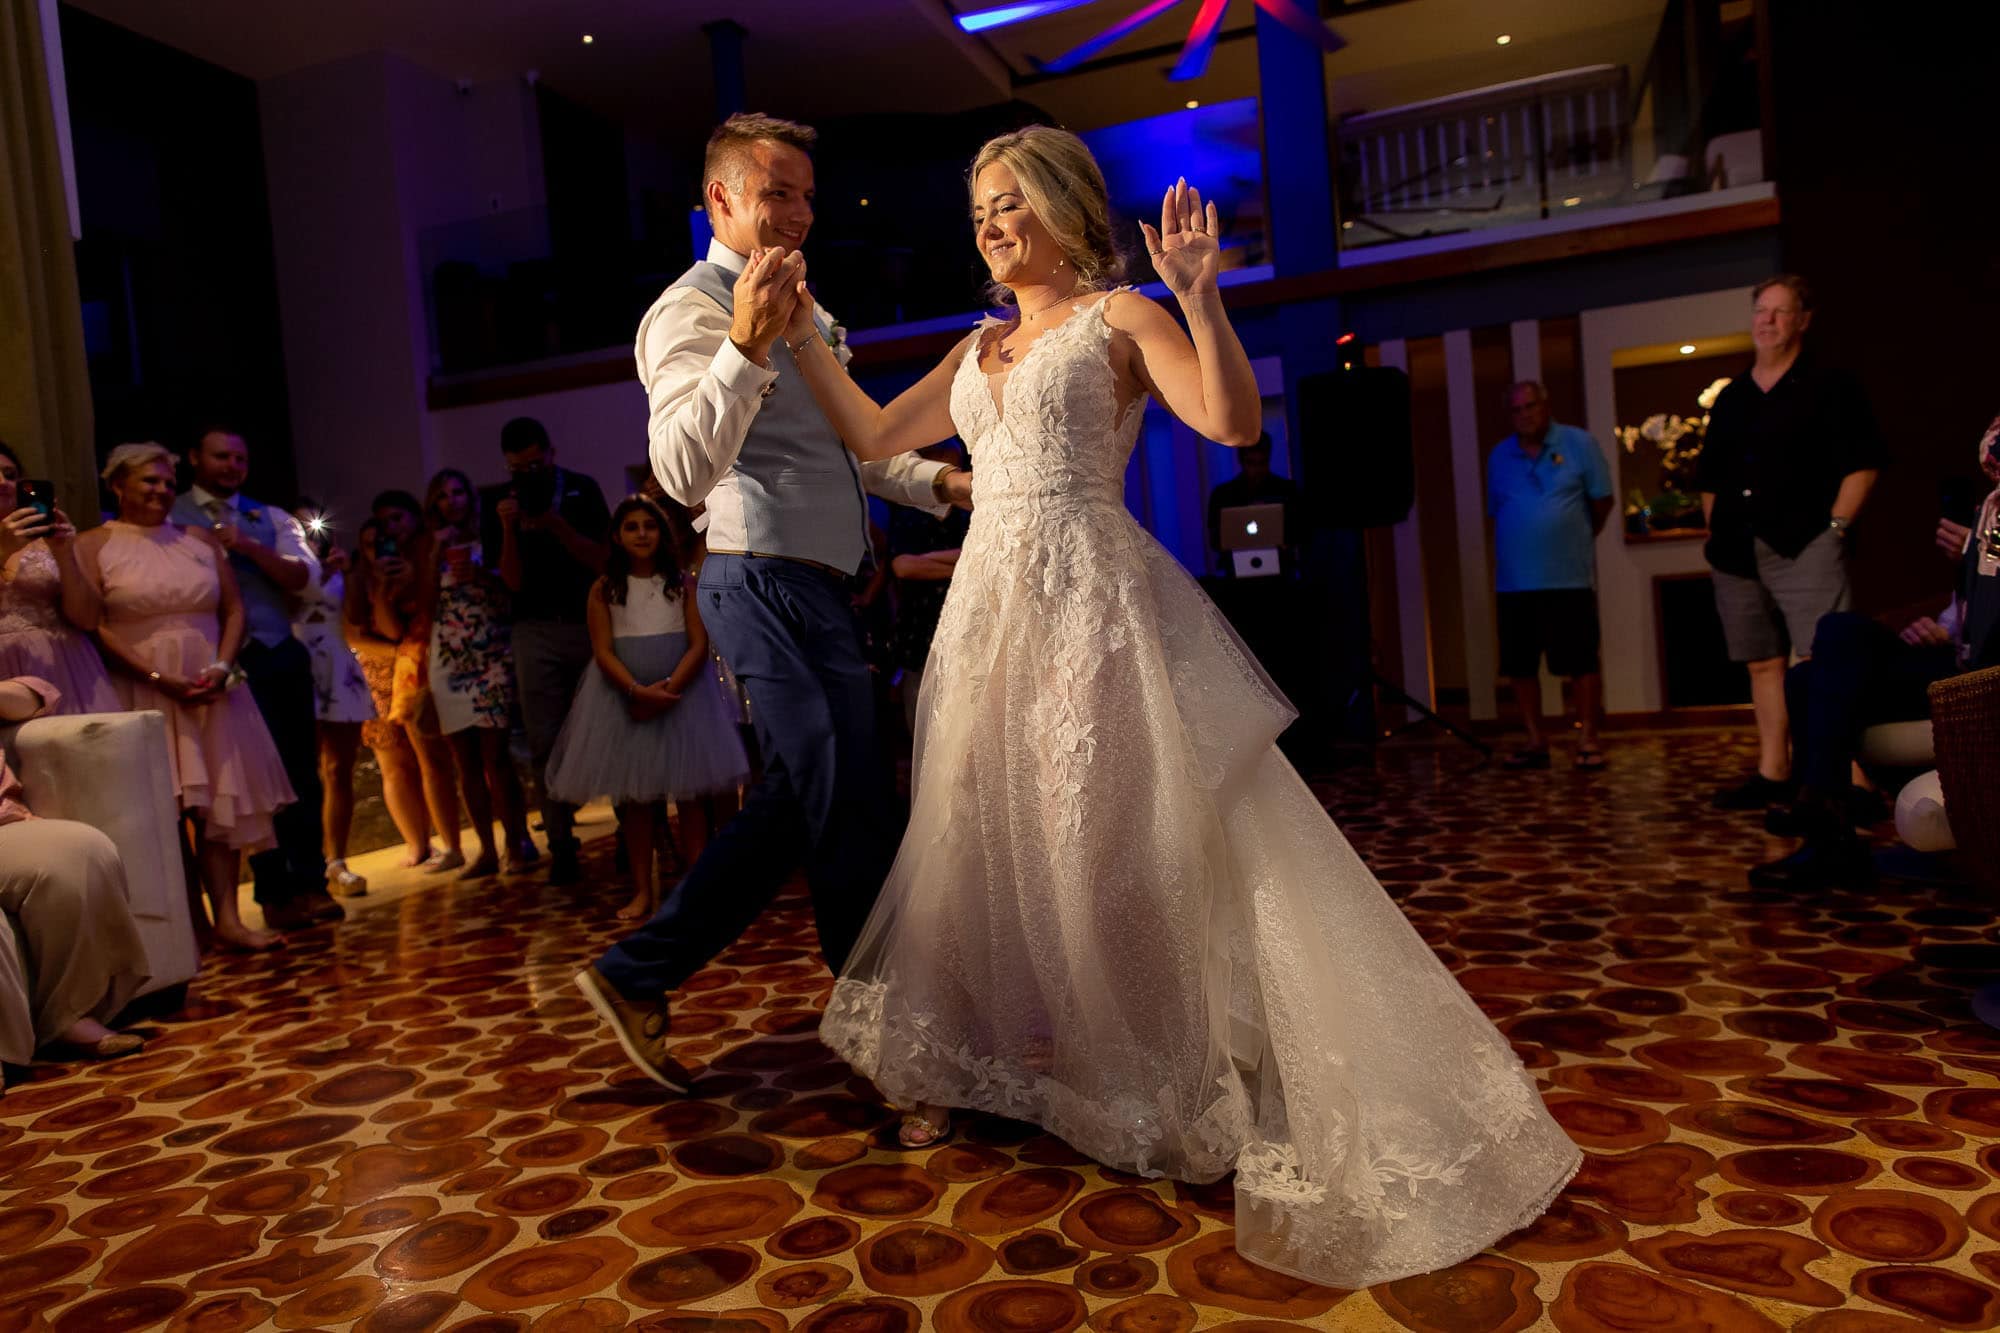 Dancing and fun during a Costa Rica wedding experience to remember!